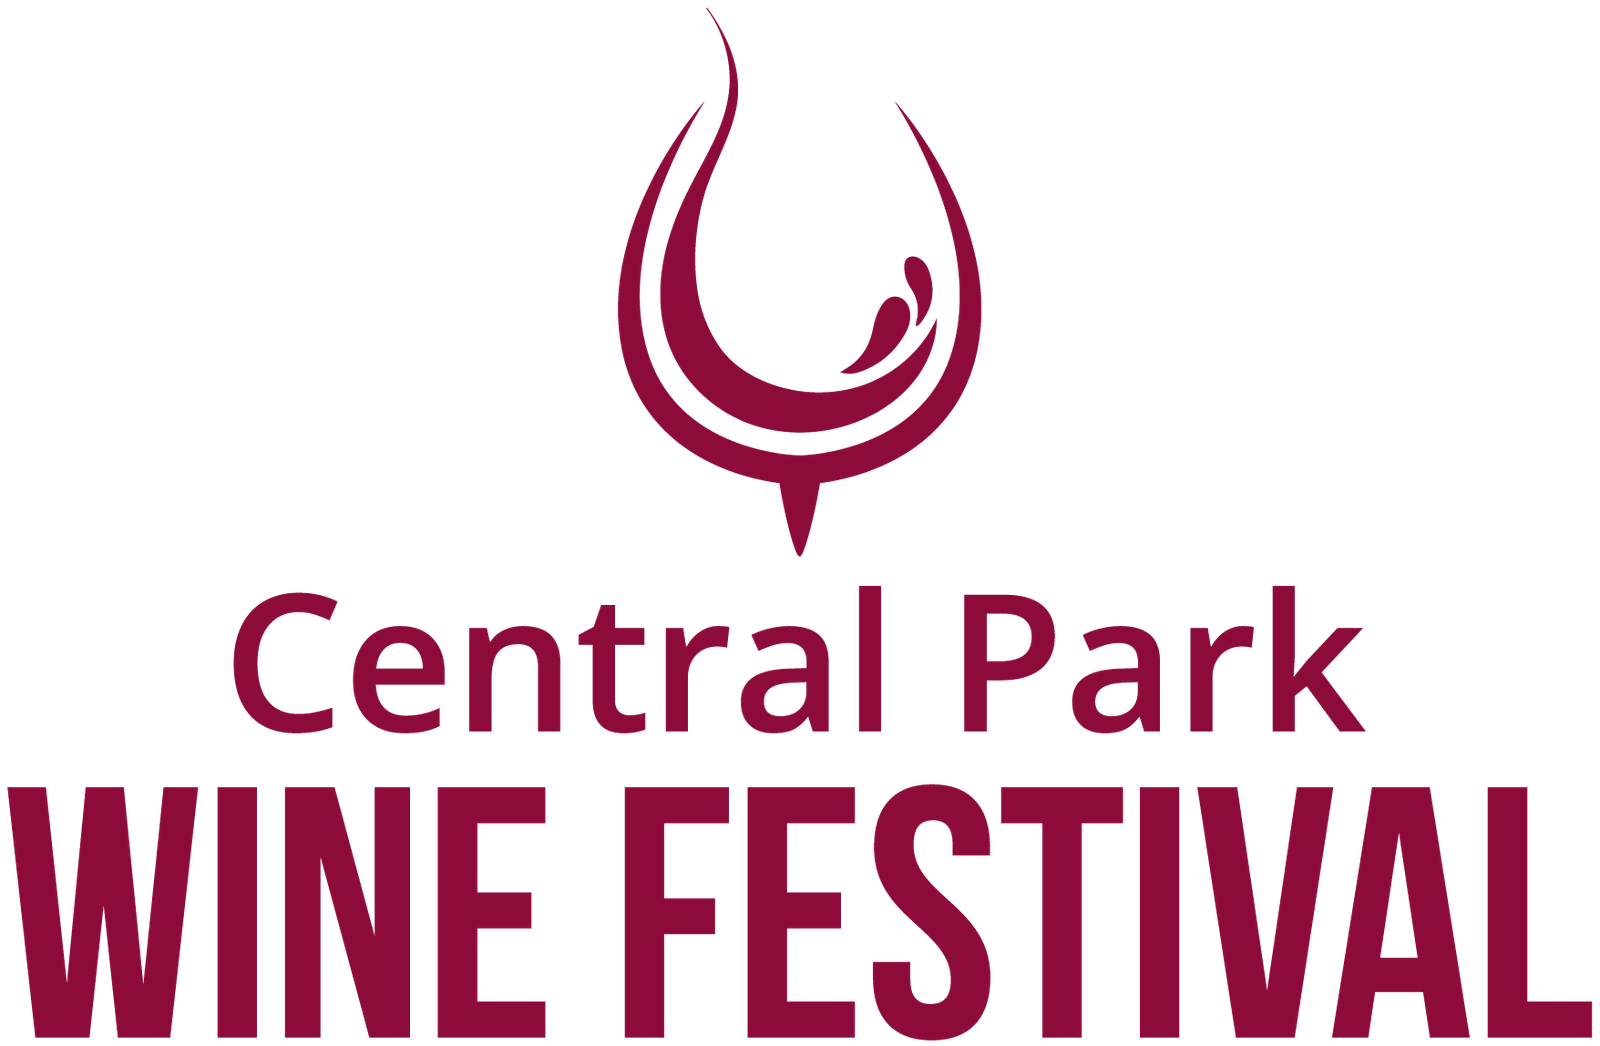 Central Park Wine Festival logo featuring a maroon stylized wine glass icon and the text 'Central Park Wine Festival' in bold, maroon font.